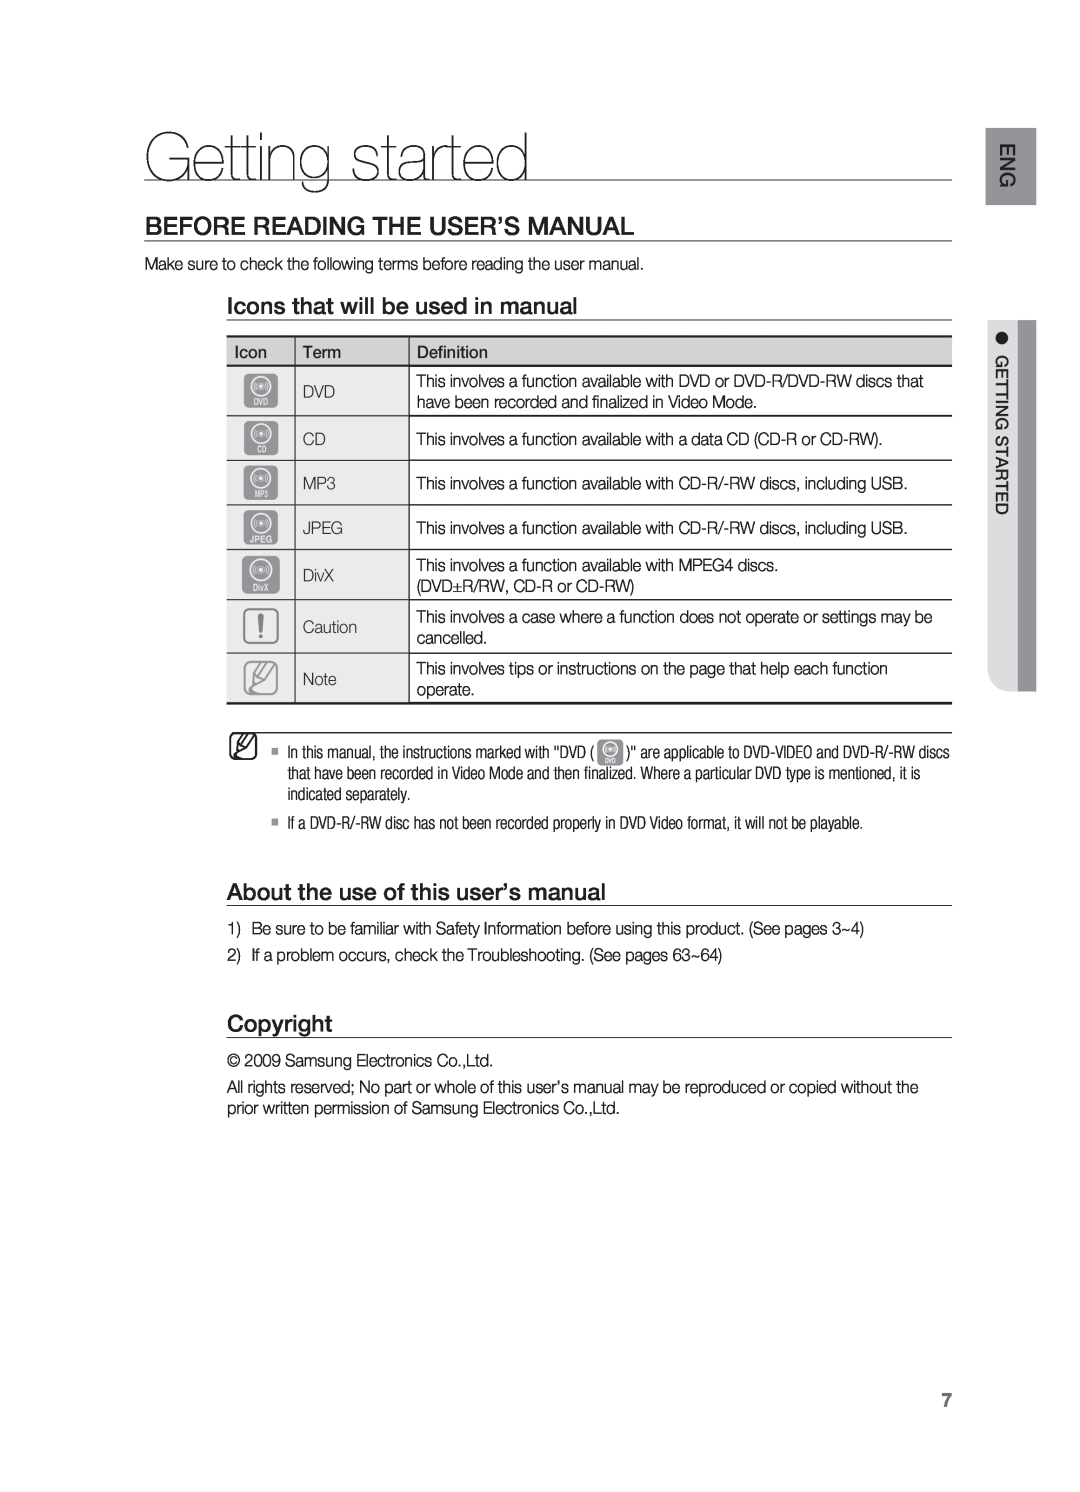 Samsung HT-X725G, HT-TX725G user manual Getting started, Before Reading the User’s Manual 